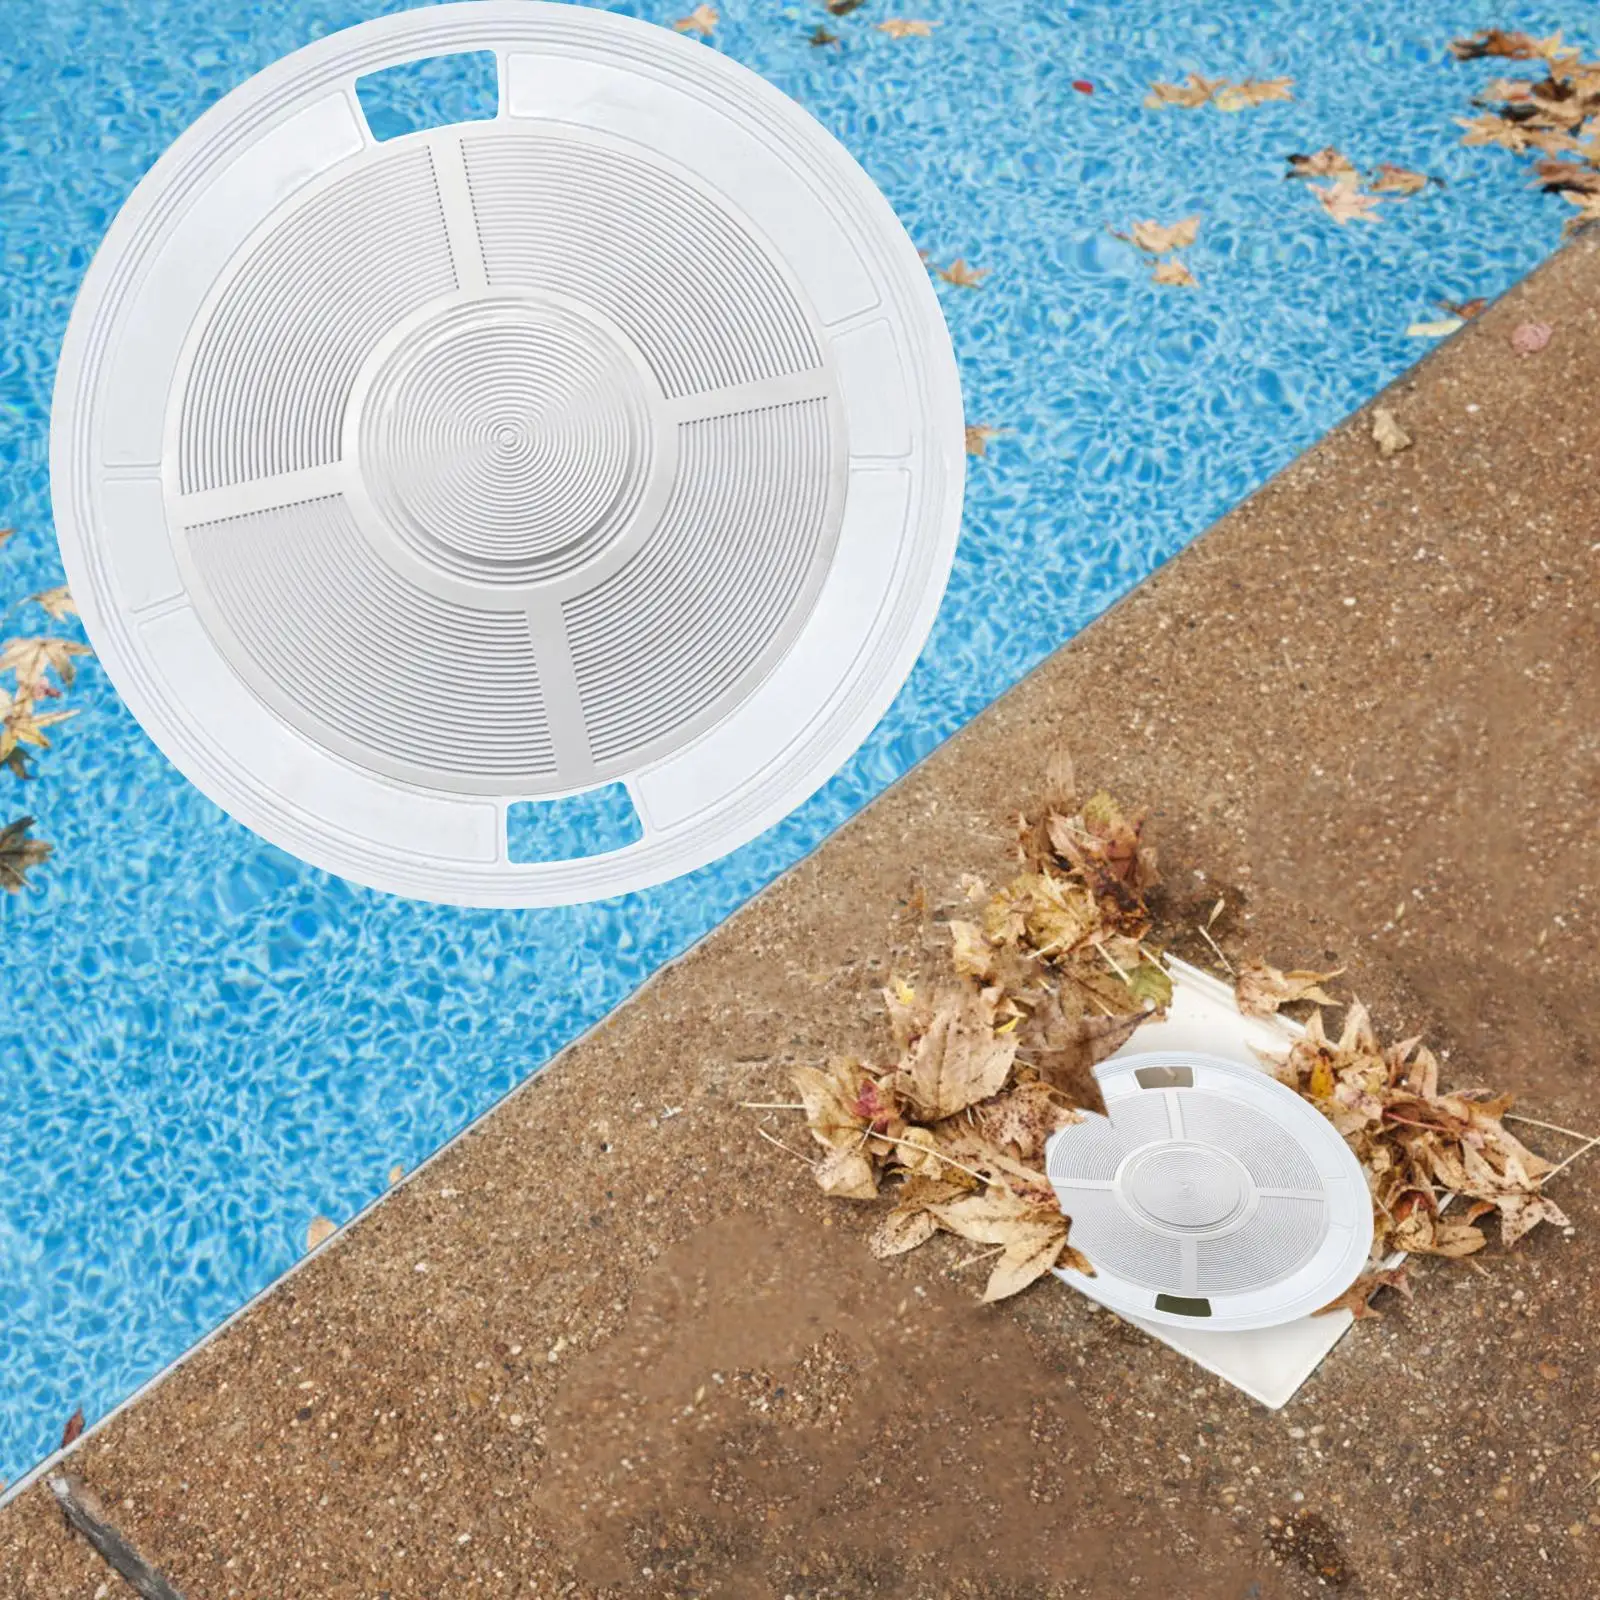 Skimmer Lid Reusable 23.5cm Diameter Pool Cleaning Tool Spare Part Replacement Skimmer Deck Cover in Ground Pool for SP1091LX